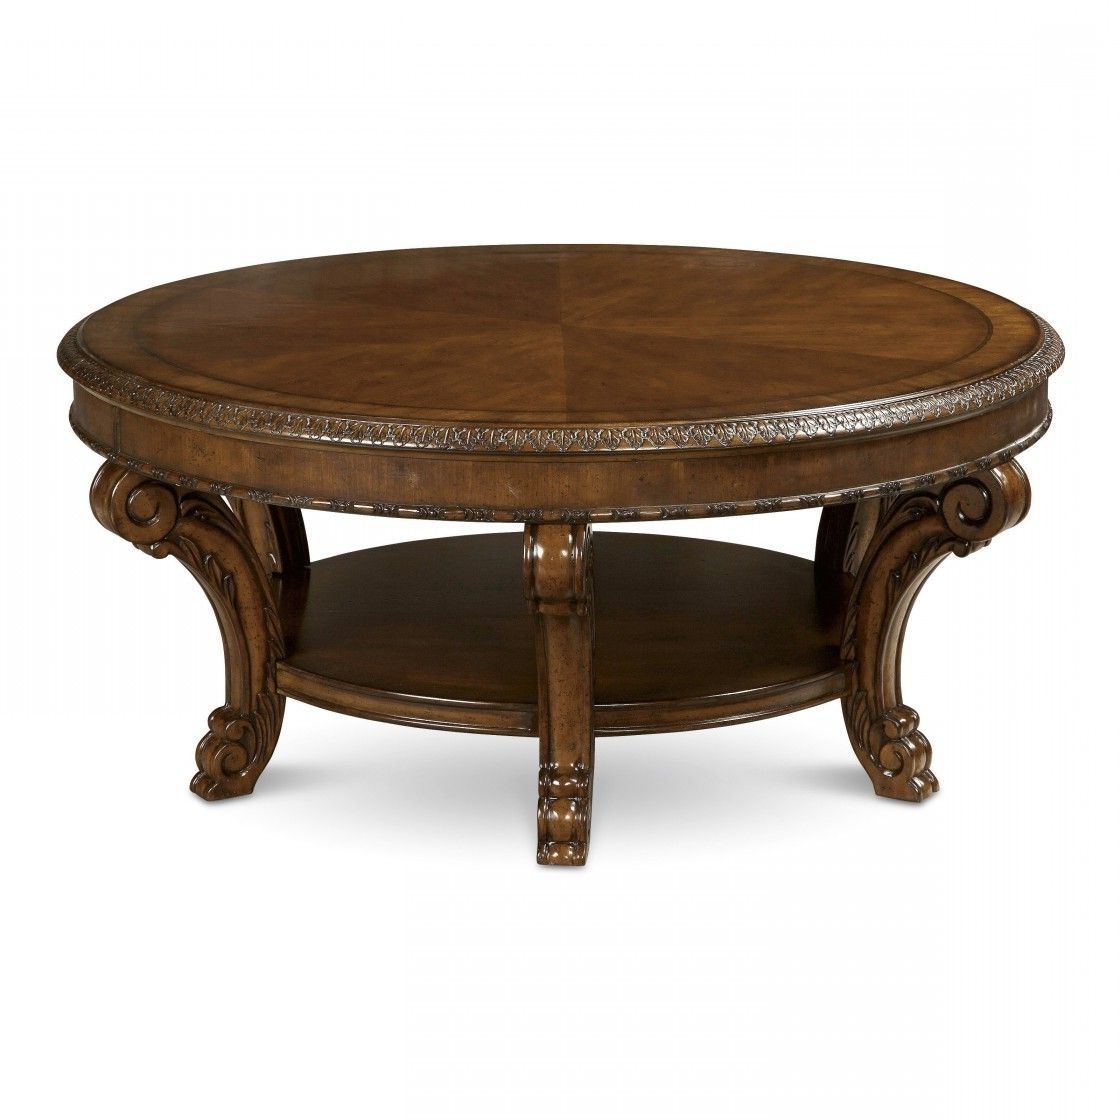 Popular Round Carved Wood Coffee Tables Inside Amazing Luxury High Gloss Finished Brown Wooden Furniture Hand (View 12 of 20)